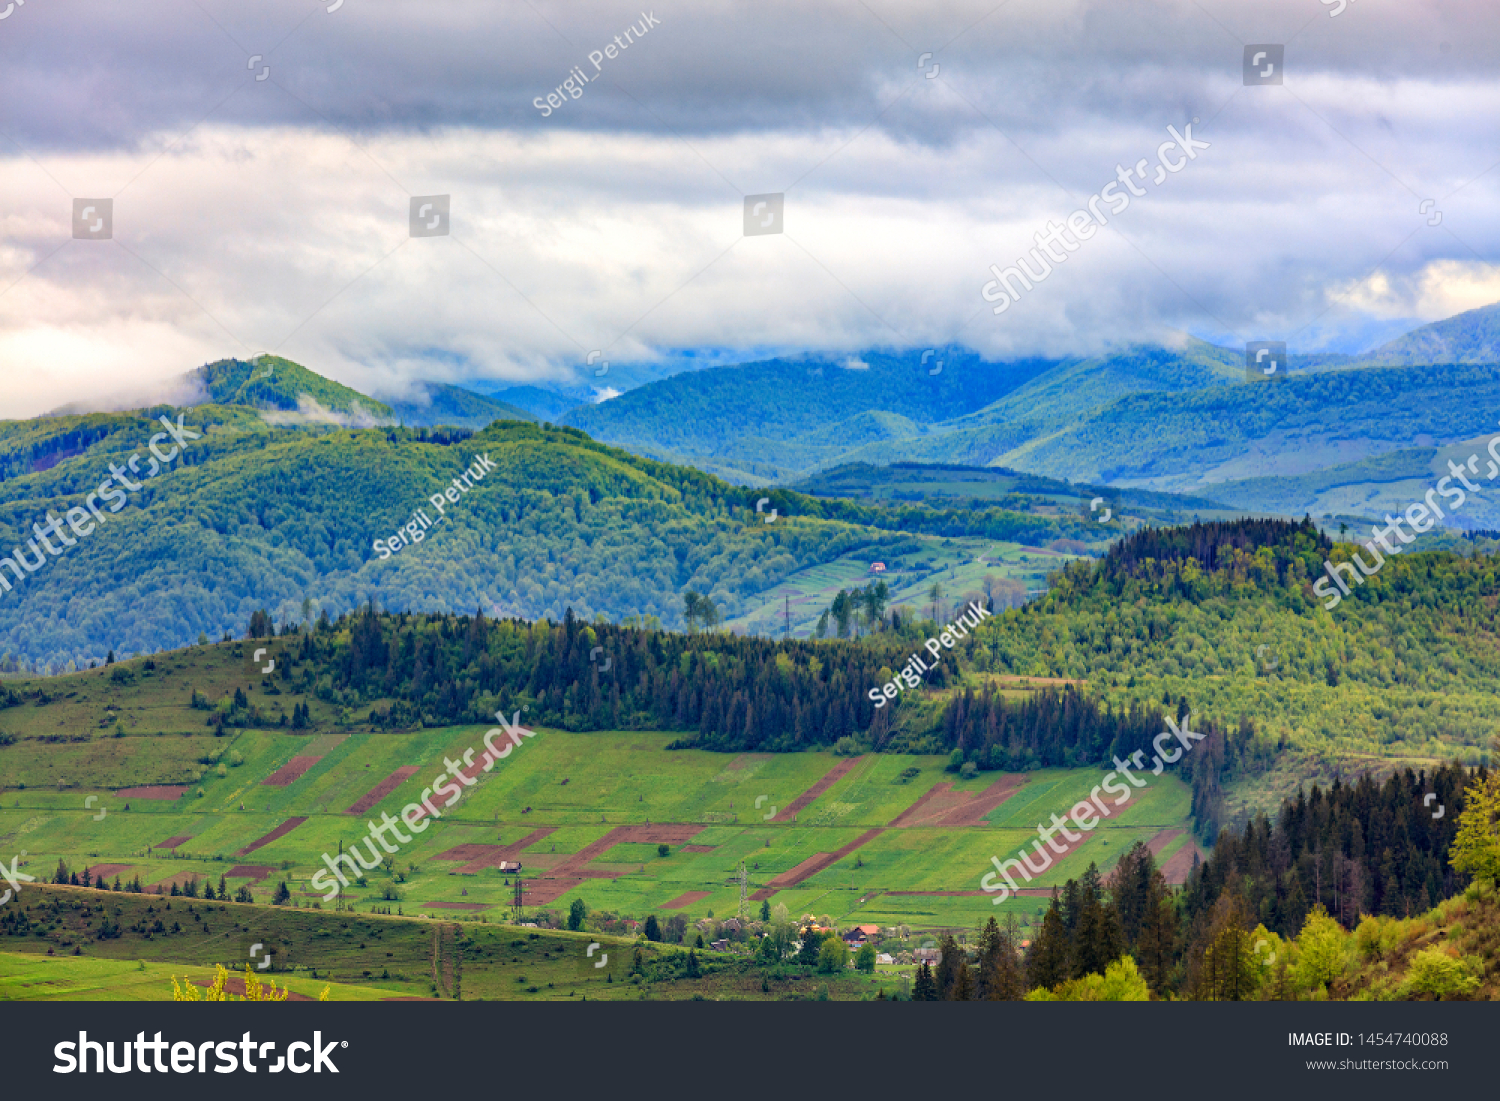 In the valley on the mountainside stretched rectangular agricultural land plots against the backdrop of the picturesque landscape of the Carpathian Mountains, shrouded in mist. #1454740088